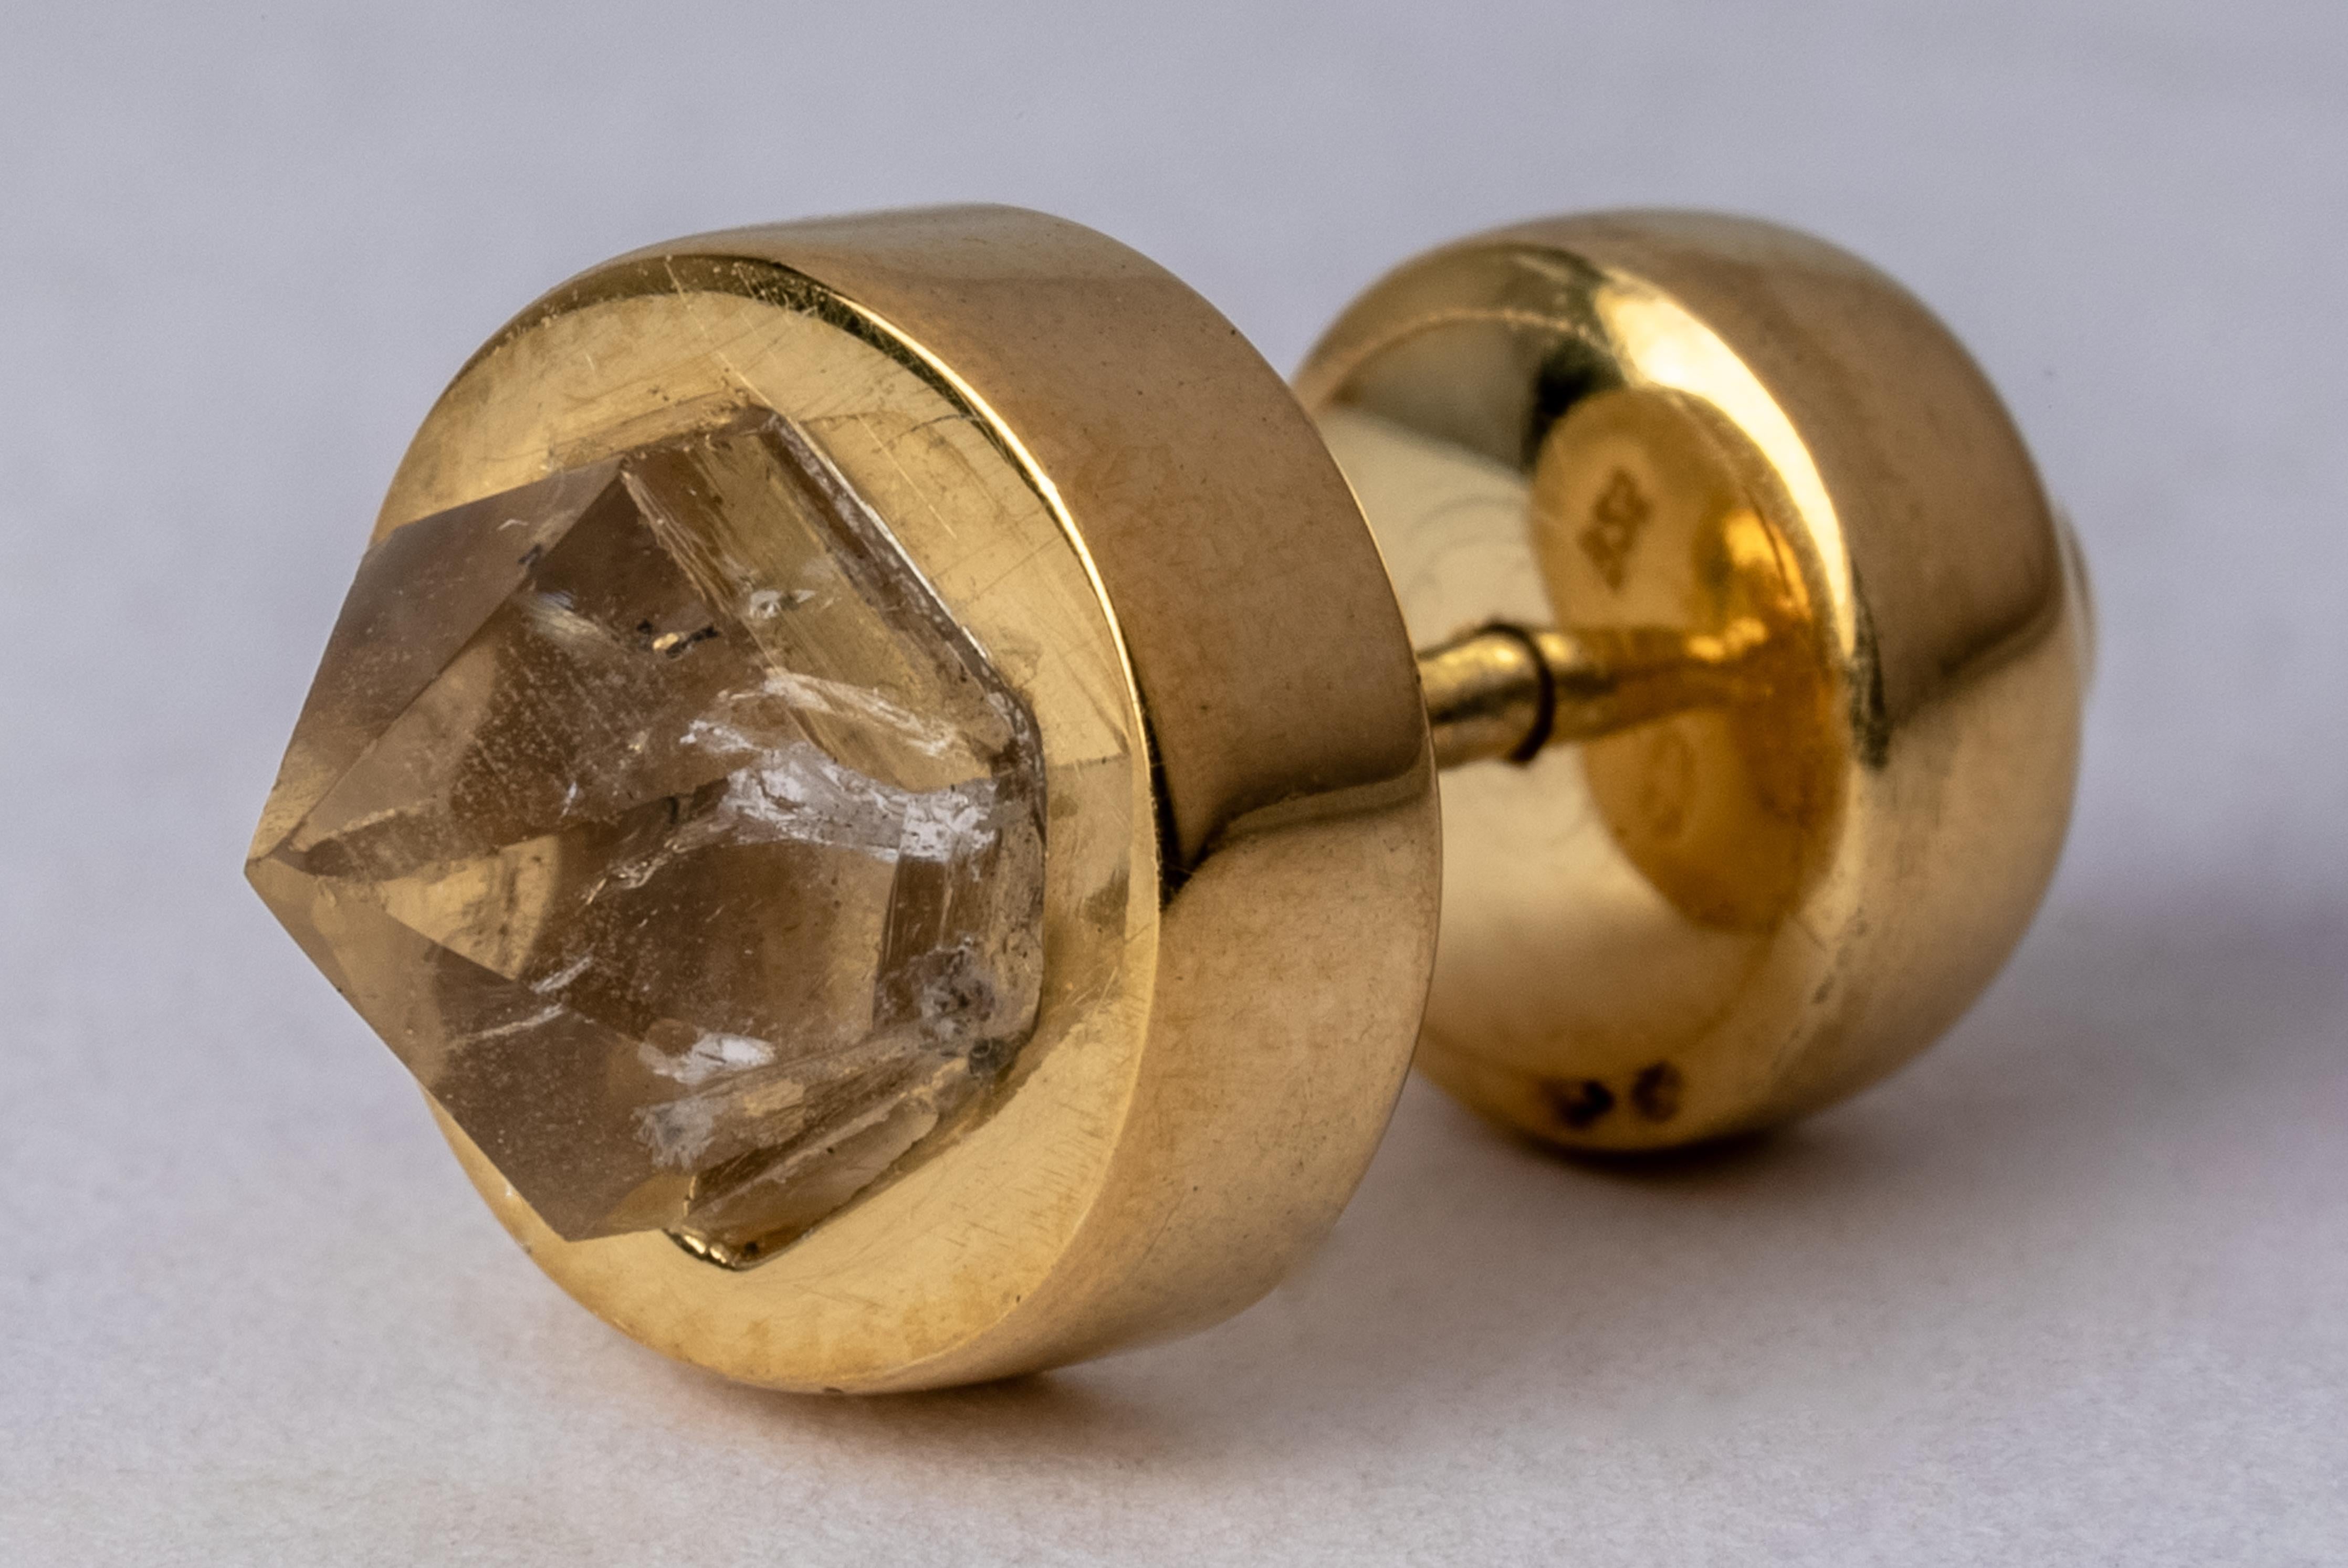 Stud earring in sterling silver and rough of herkimer diamond. The sterling silver substrate, polished, and electroplated with 18k yellow gold. We use facet-grade rough gemstones which means that the traditional intention of this rough material is